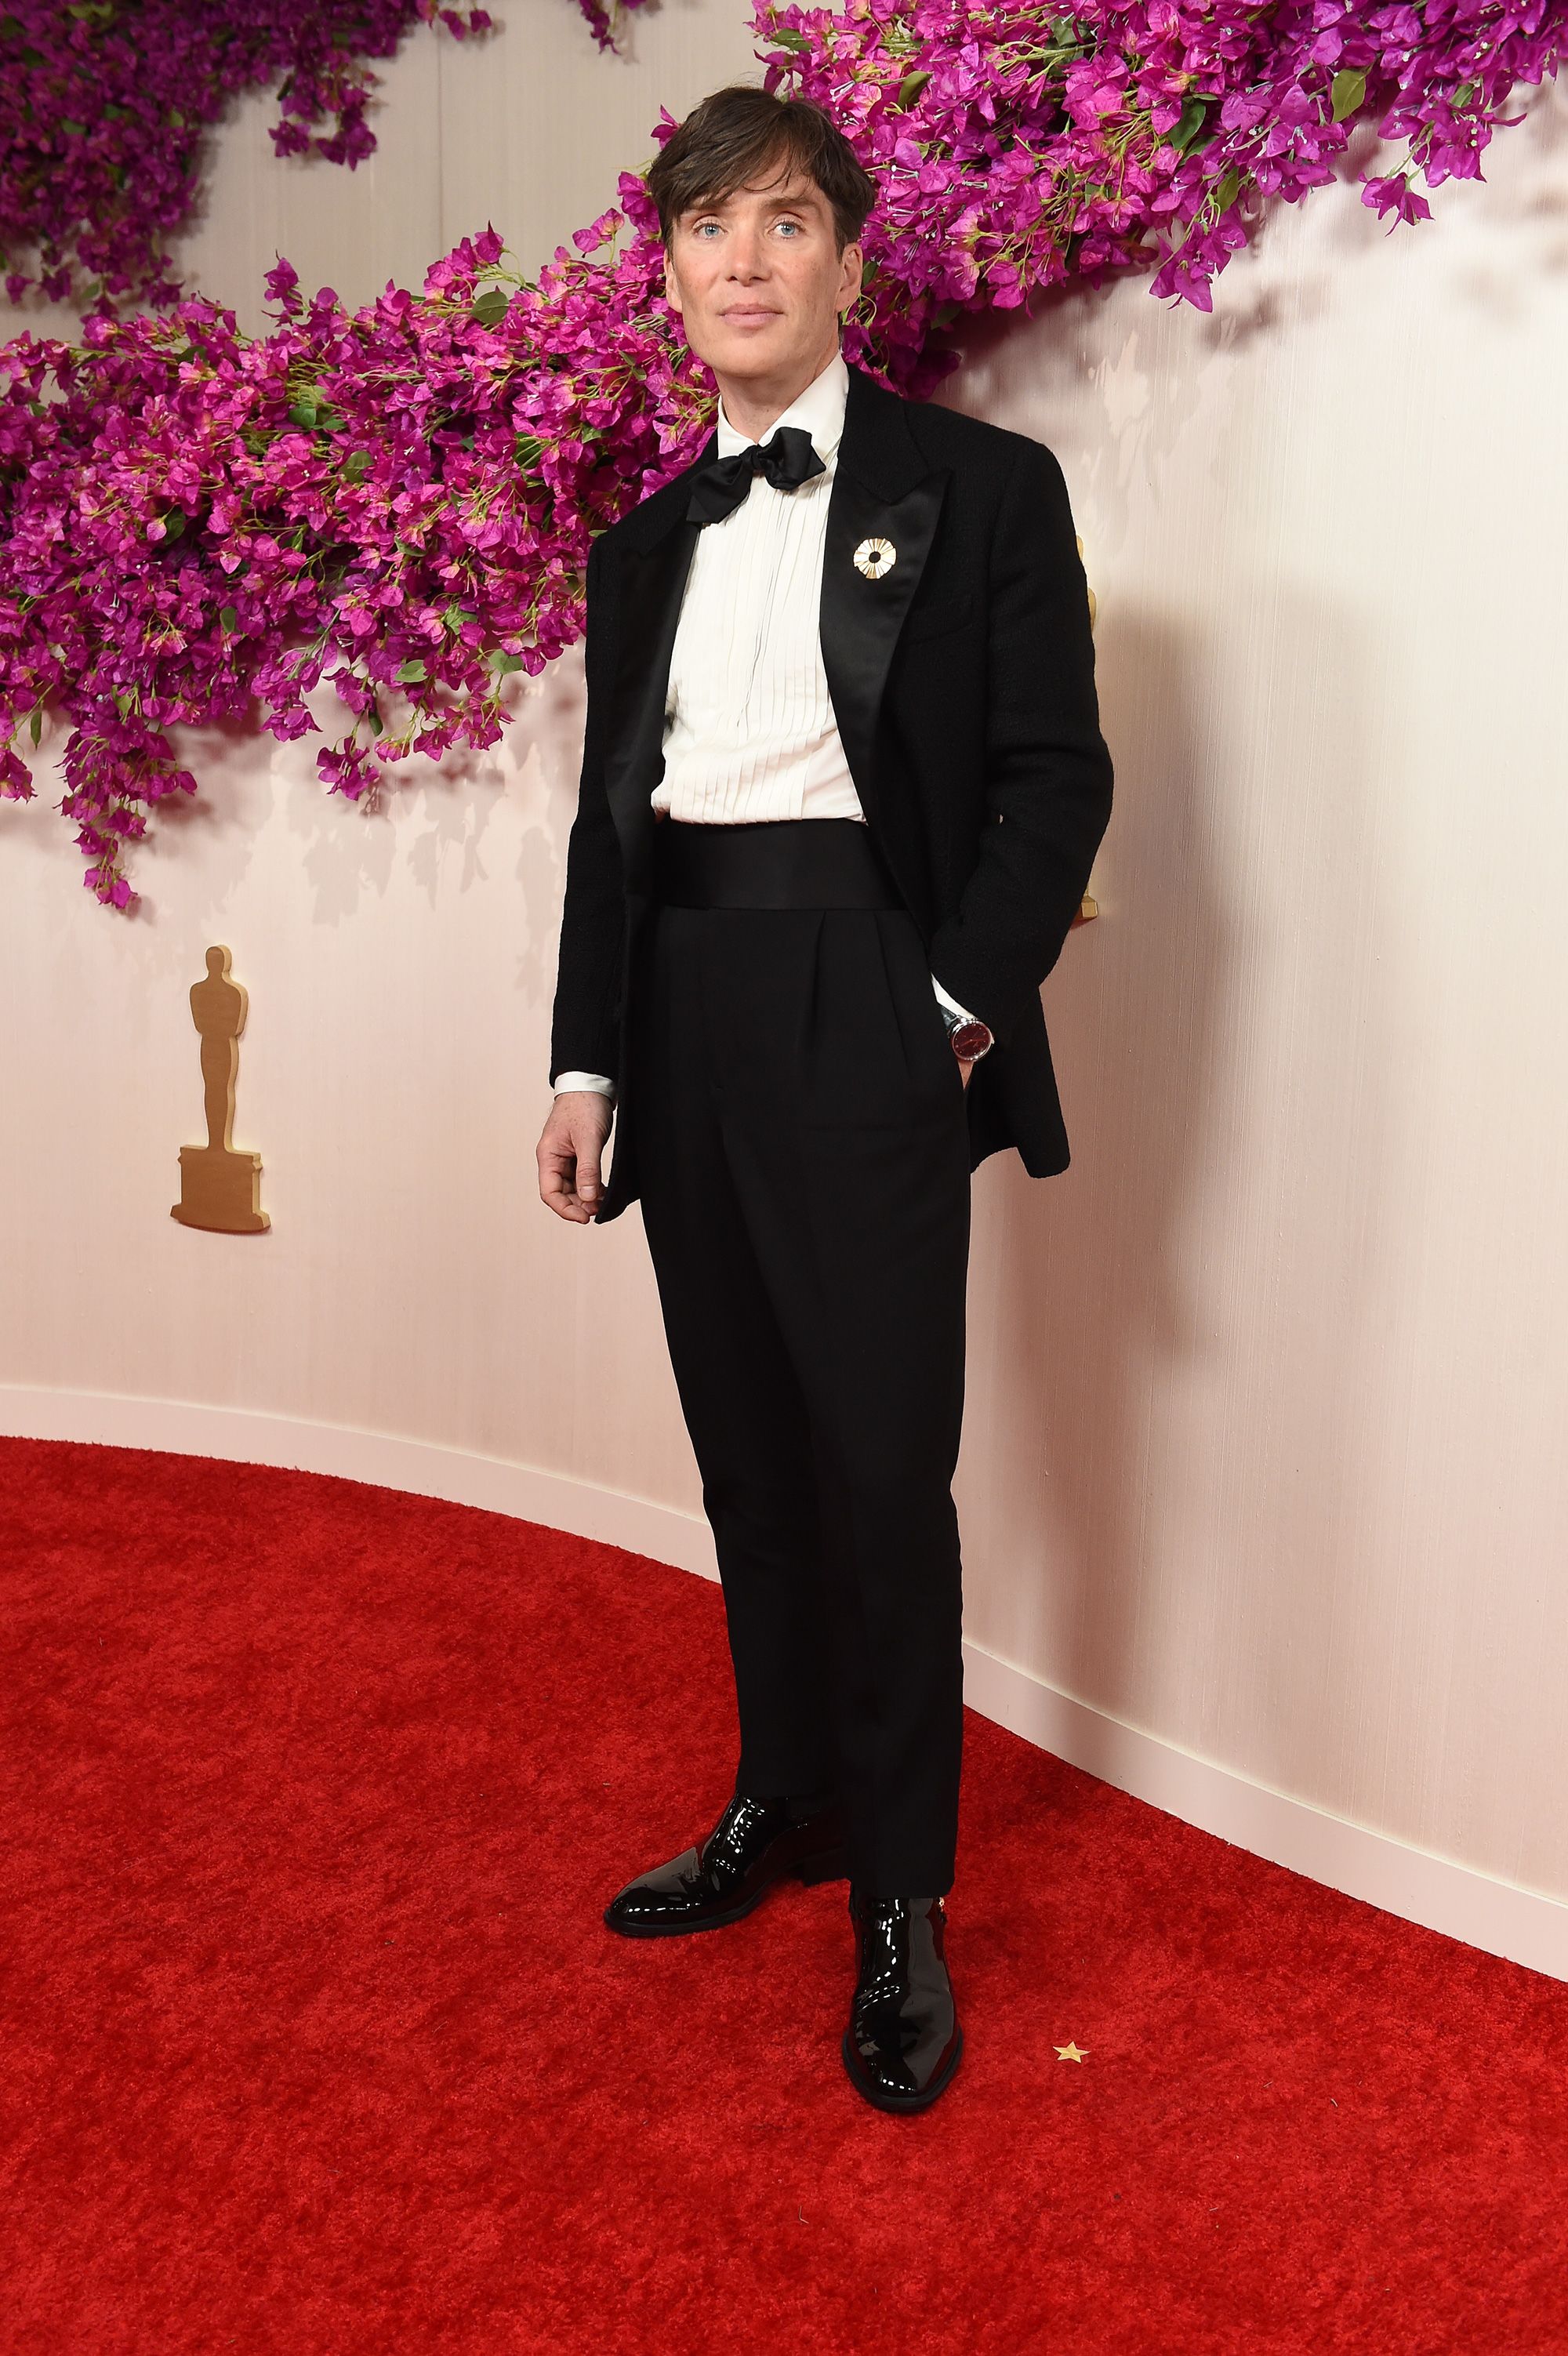 Cillian Murphy wore a custom Atelier Versace suit topped with a gem brooch designed by Hong Kong-based designer Bertrand Mak’s jewelry brand Sauvereign.